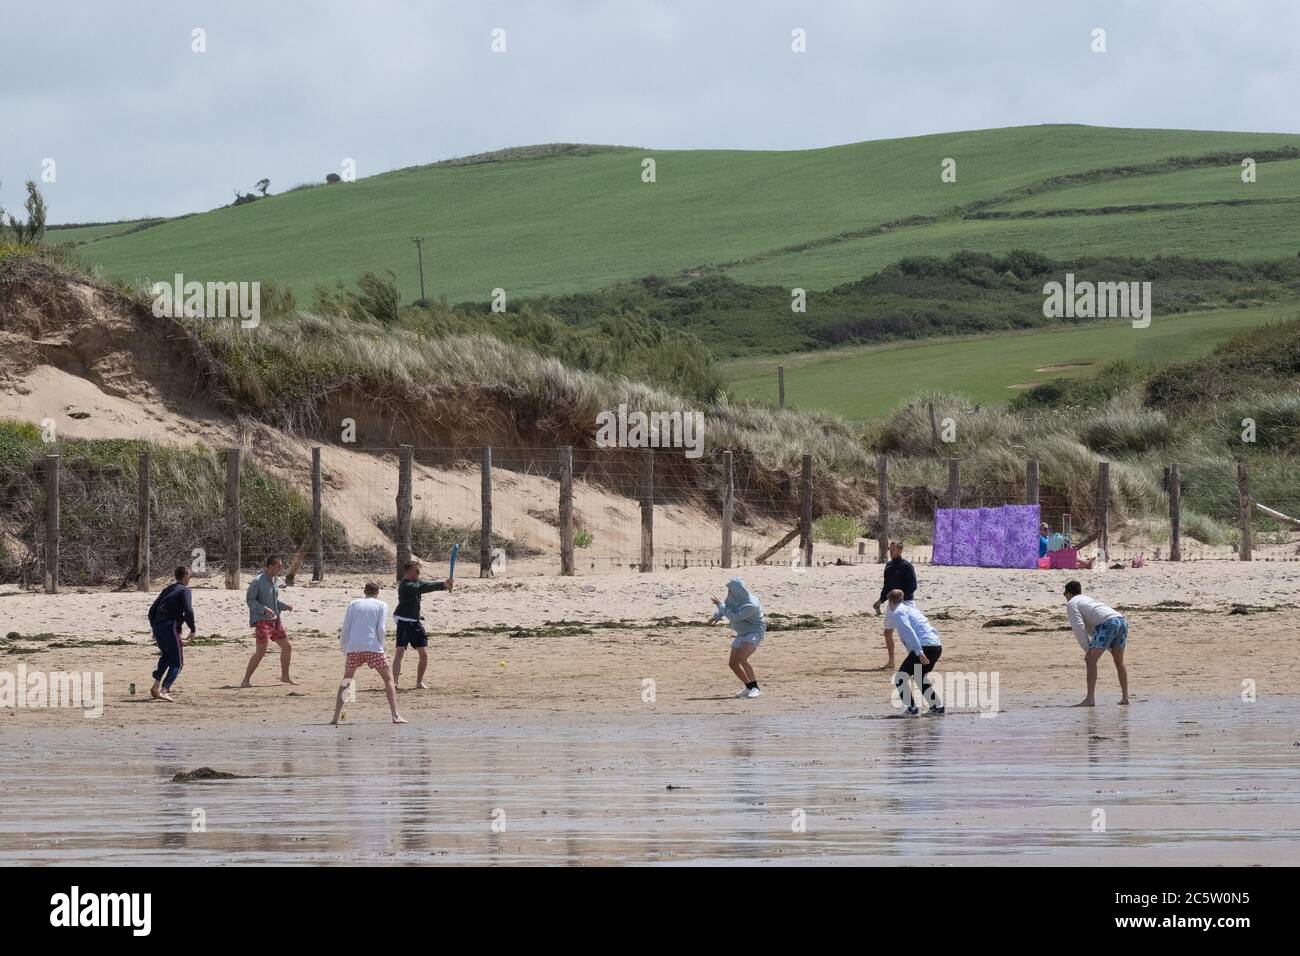 Daymer Bay, Rock, Cornwall, UK. 5th July 2020. UK Weather. A strong wind didn't keep people off the beach at Daymer bay this lunchtime. Ideal weather for a spot of windsurfing. Credit CWPIX /  Alamy Live News. Stock Photo